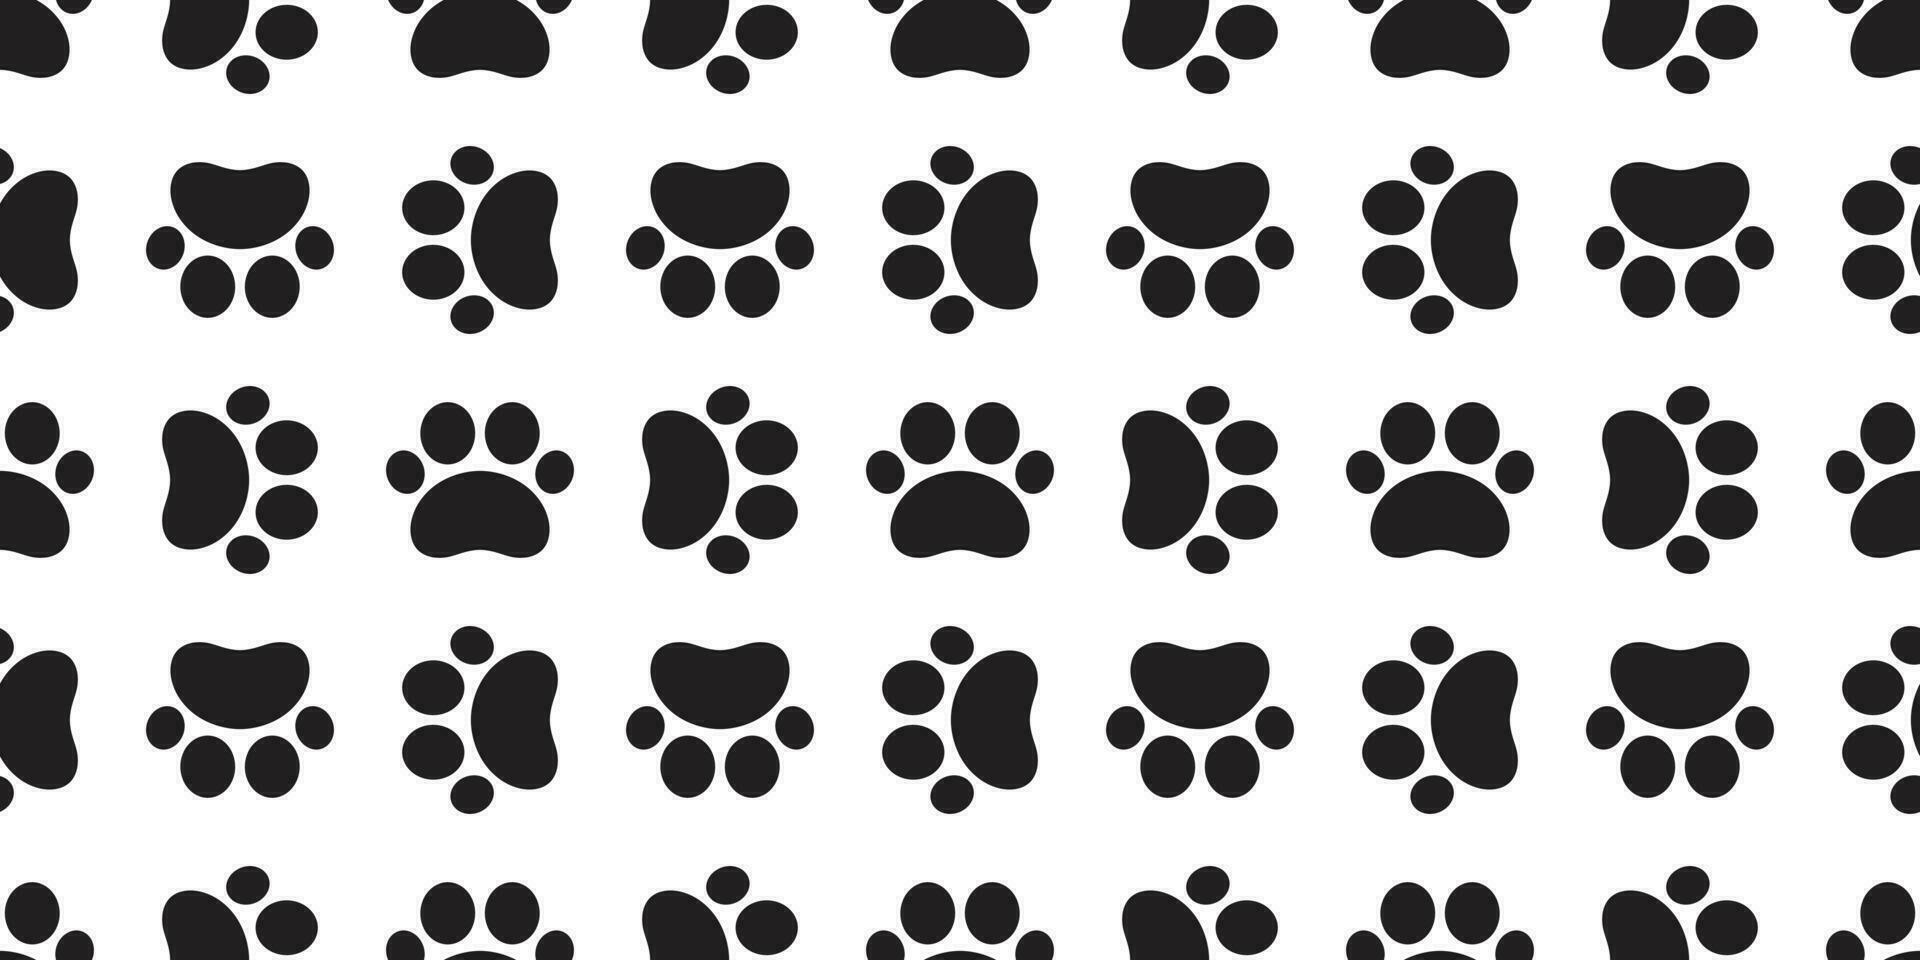 dog cat paw seamless vector pattern footprint kitten puppy tile background repeat wallpaper isolated illustration cartoon